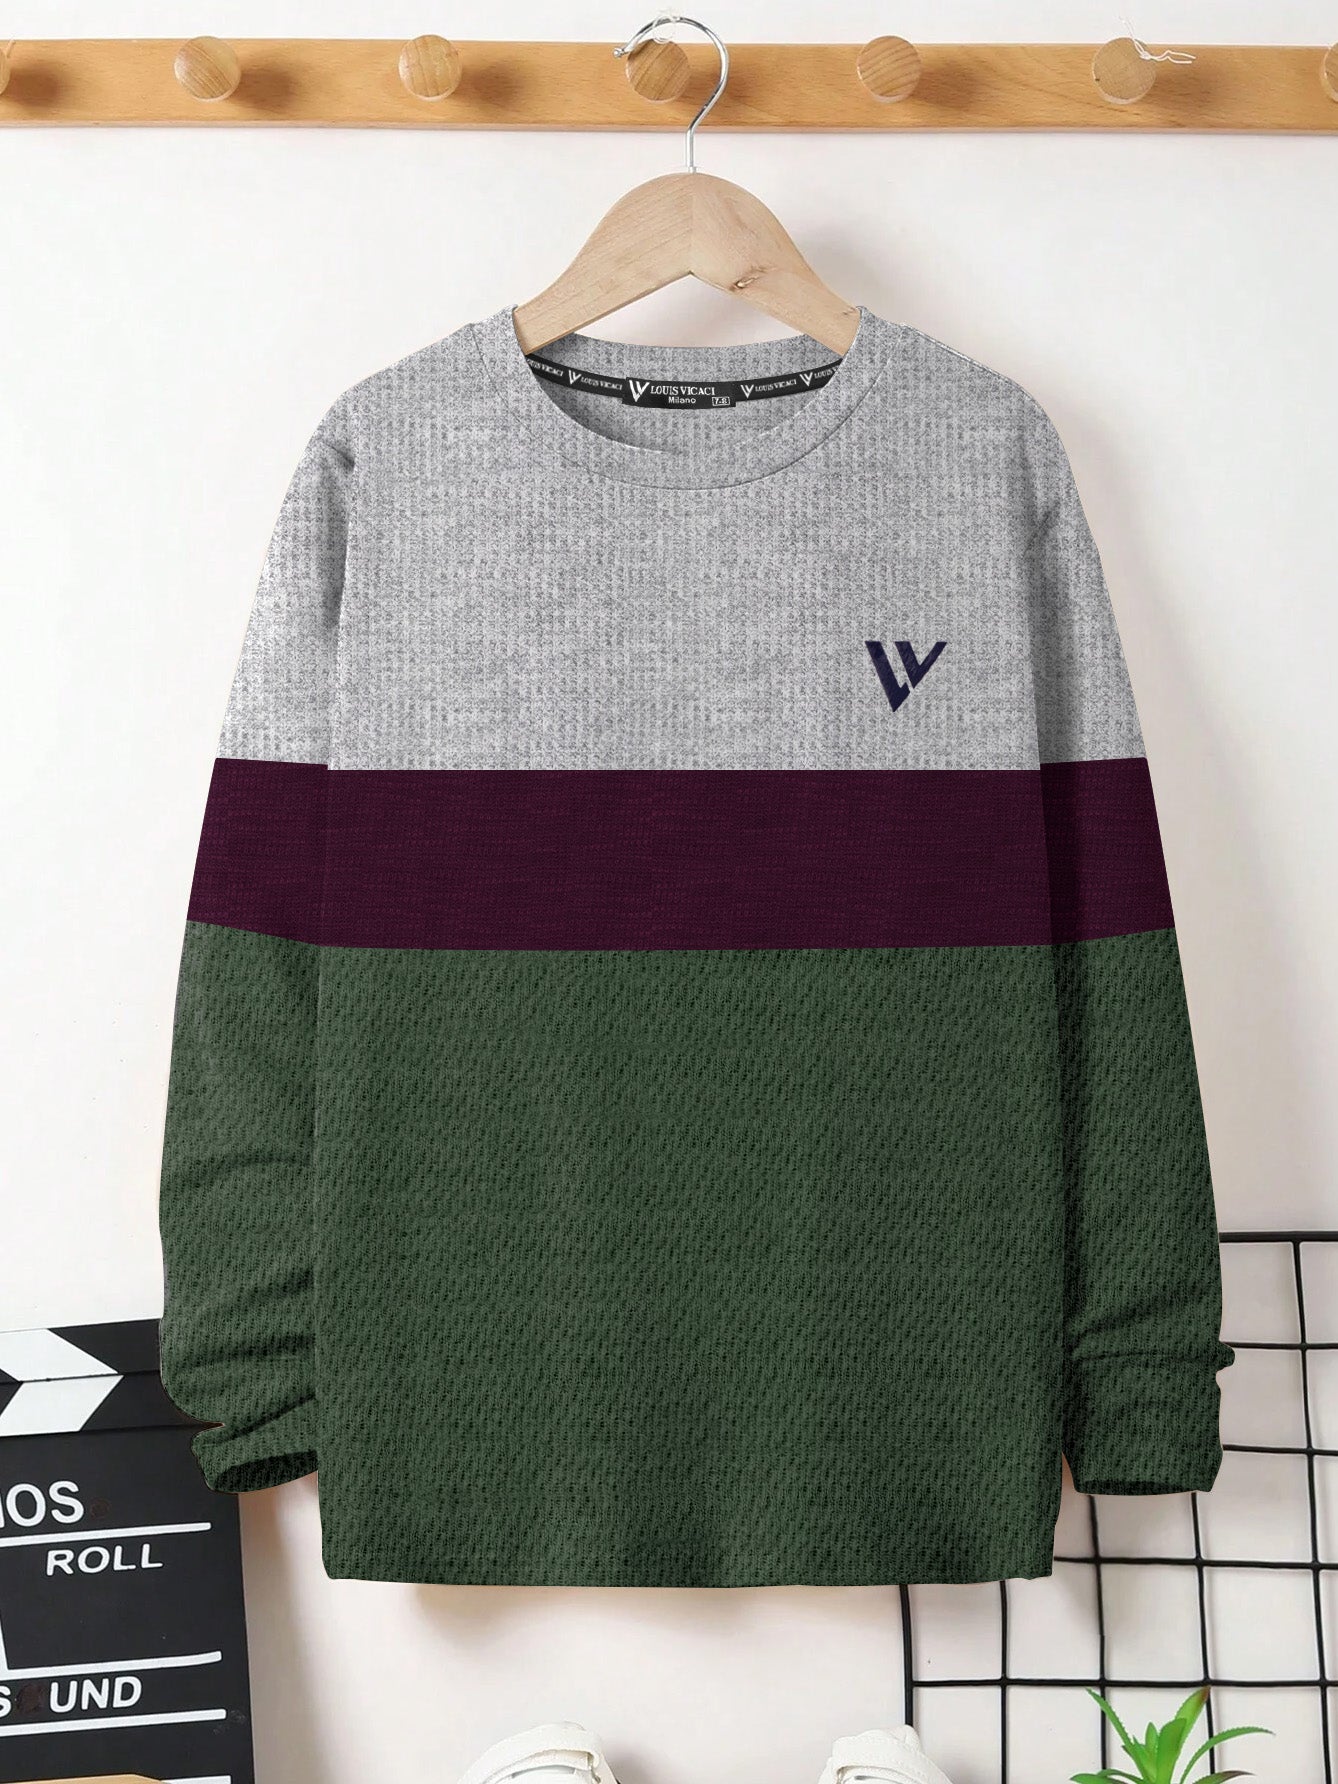 LV Crew Neck Long Sleeve Thermal Tee Shirt For Kids-Grey with Maroon & Dark Green-BE971/BR13218